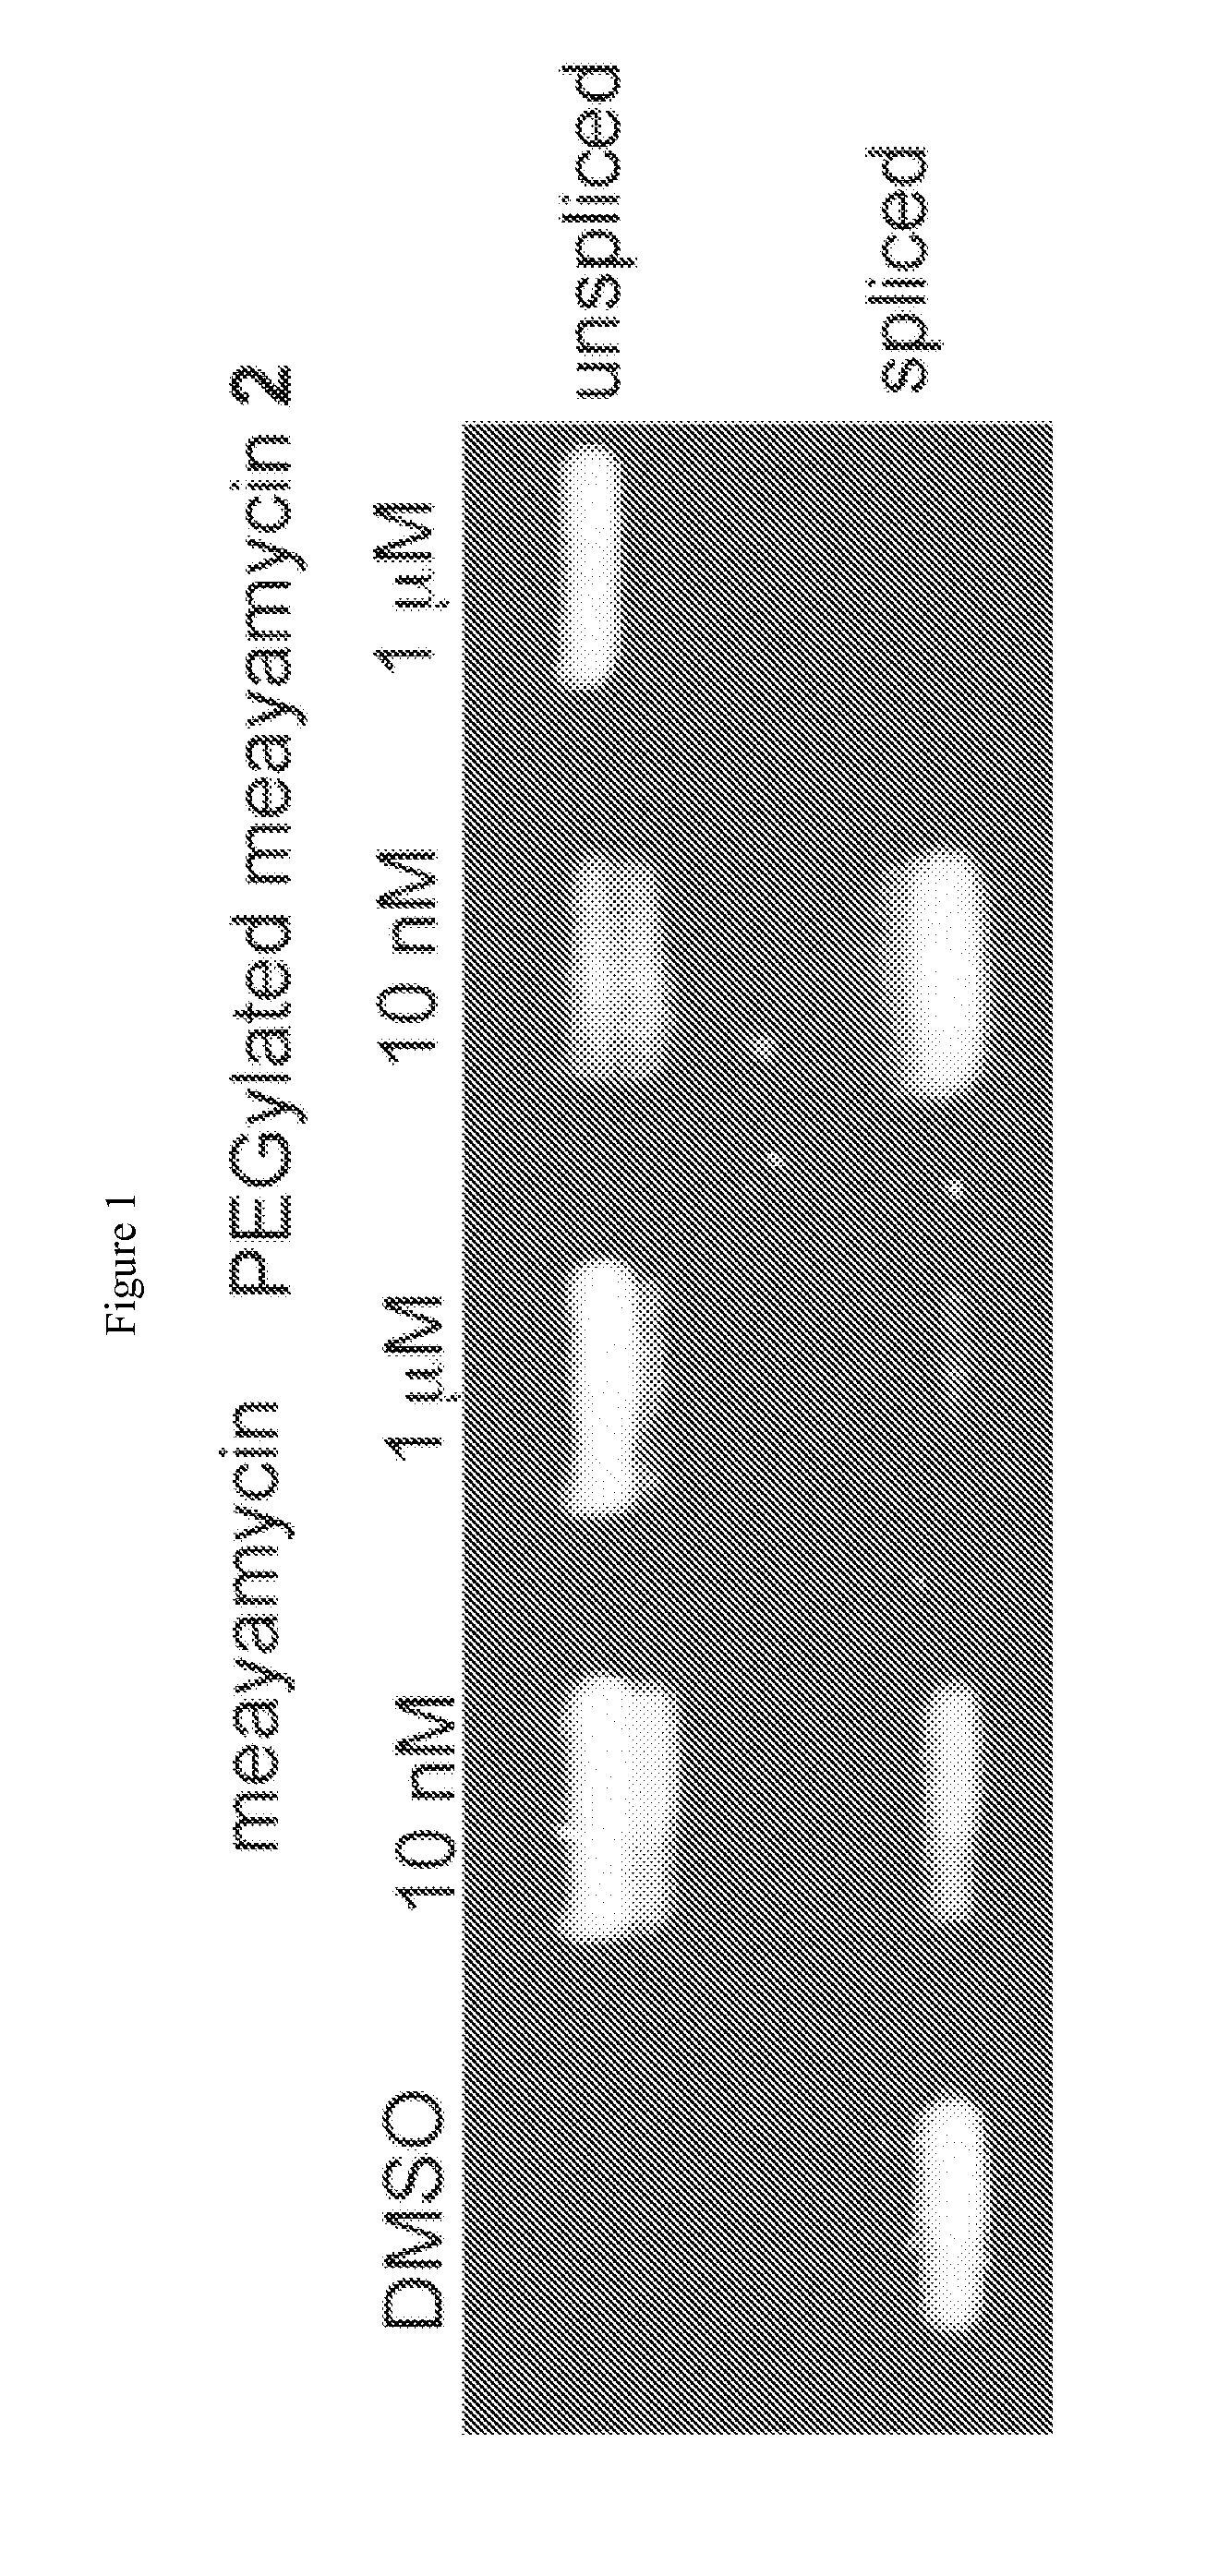 Synthesis of fr901464 and analogs with antitumor activity